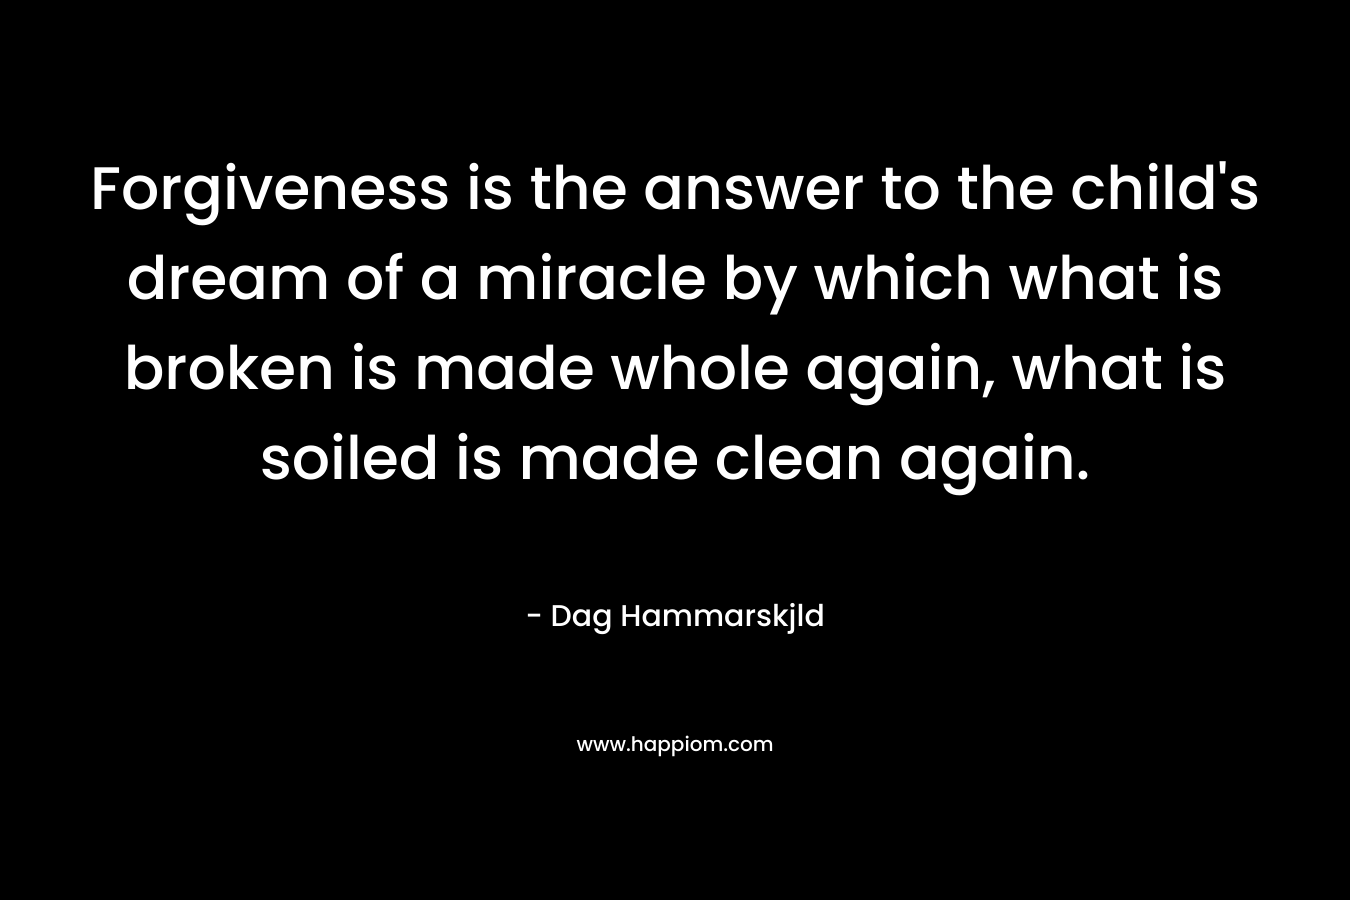 Forgiveness is the answer to the child's dream of a miracle by which what is broken is made whole again, what is soiled is made clean again.